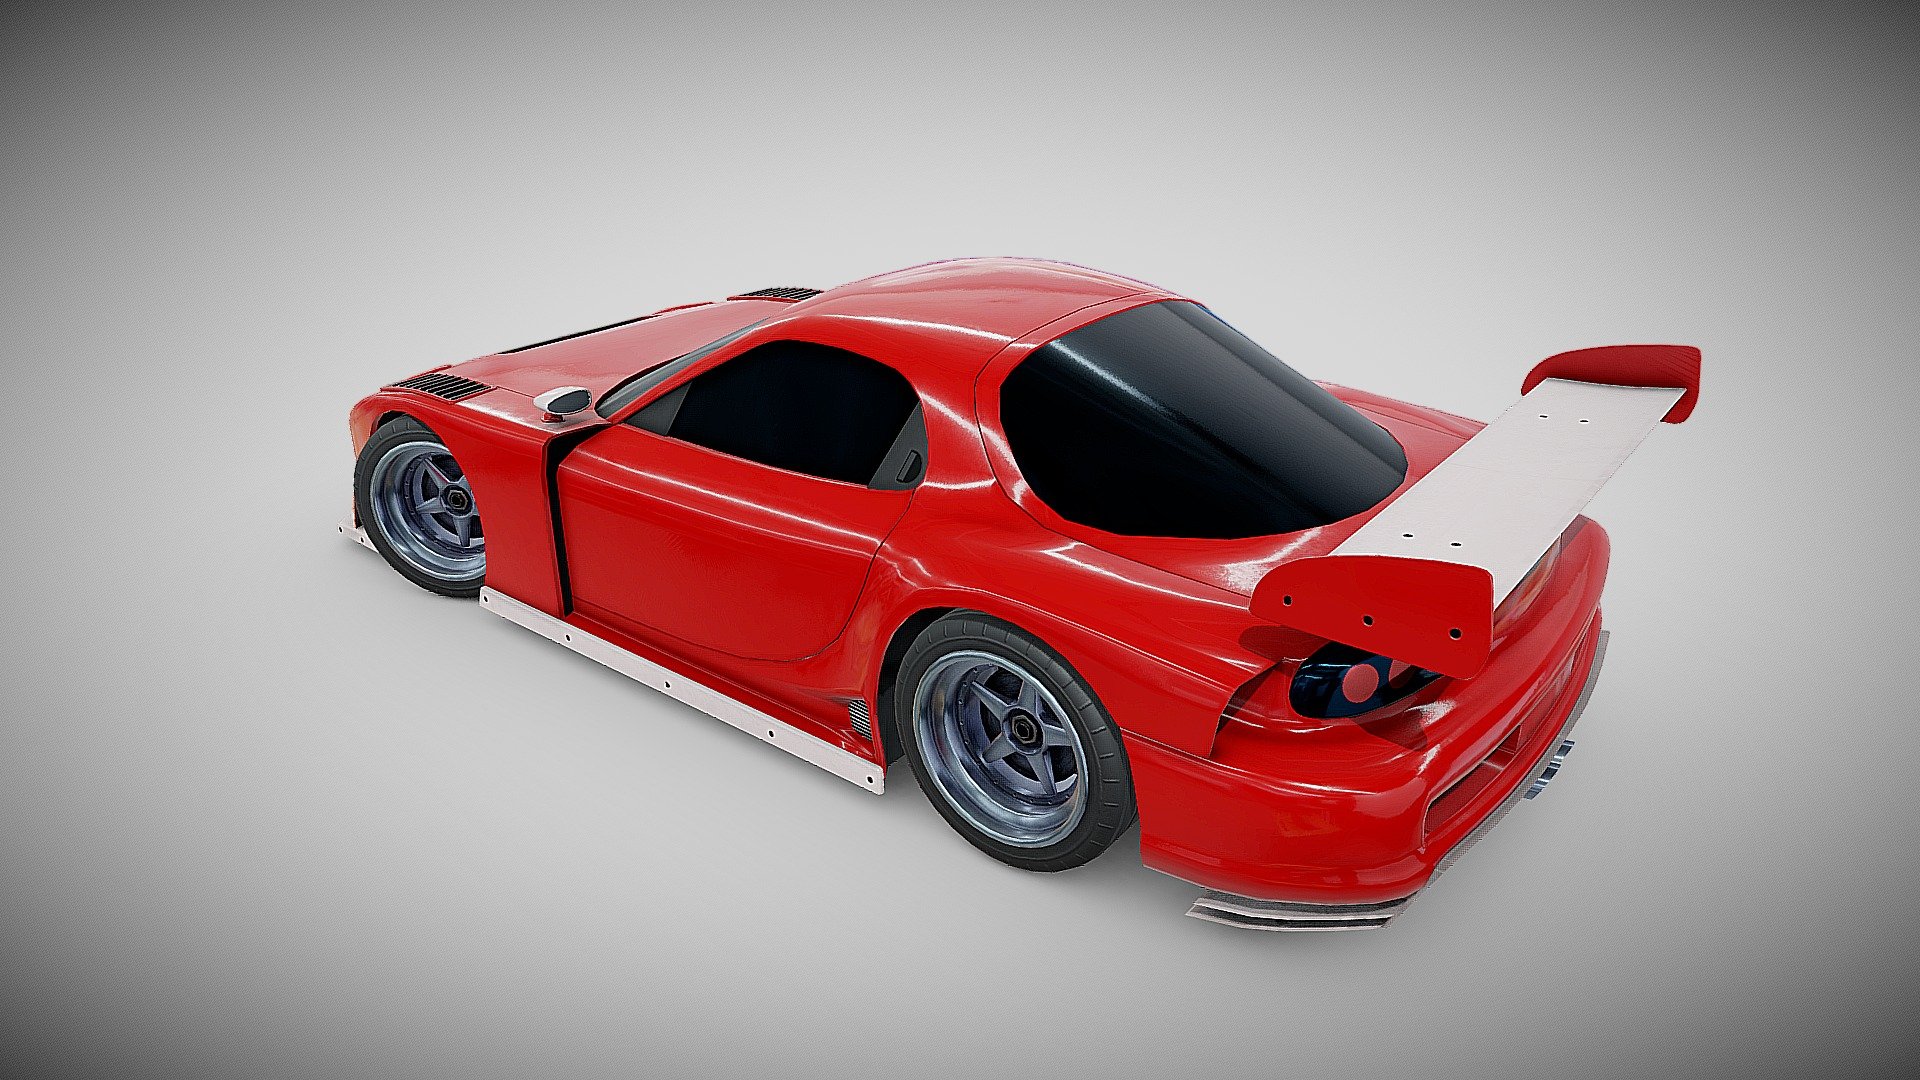 Best for background scene and mobile projects. Interior not included. Separate parts : wheels, car body. Model scale Unity engine. The model has several color options in the additional RAR file 3d model